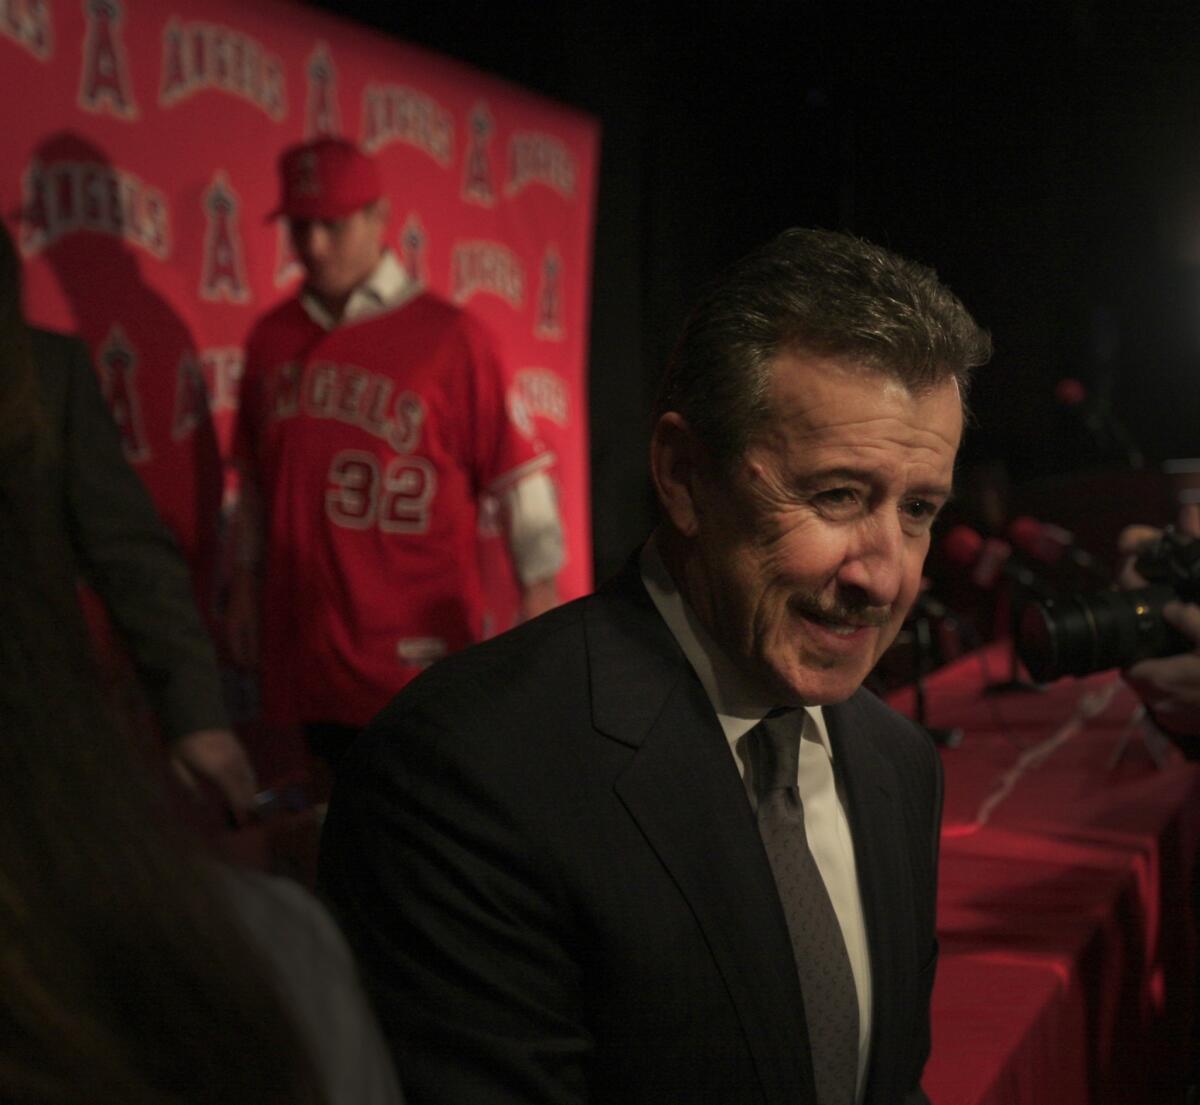 Anaheim's deal with Angels owner Arte Moreno is a good move for the city.